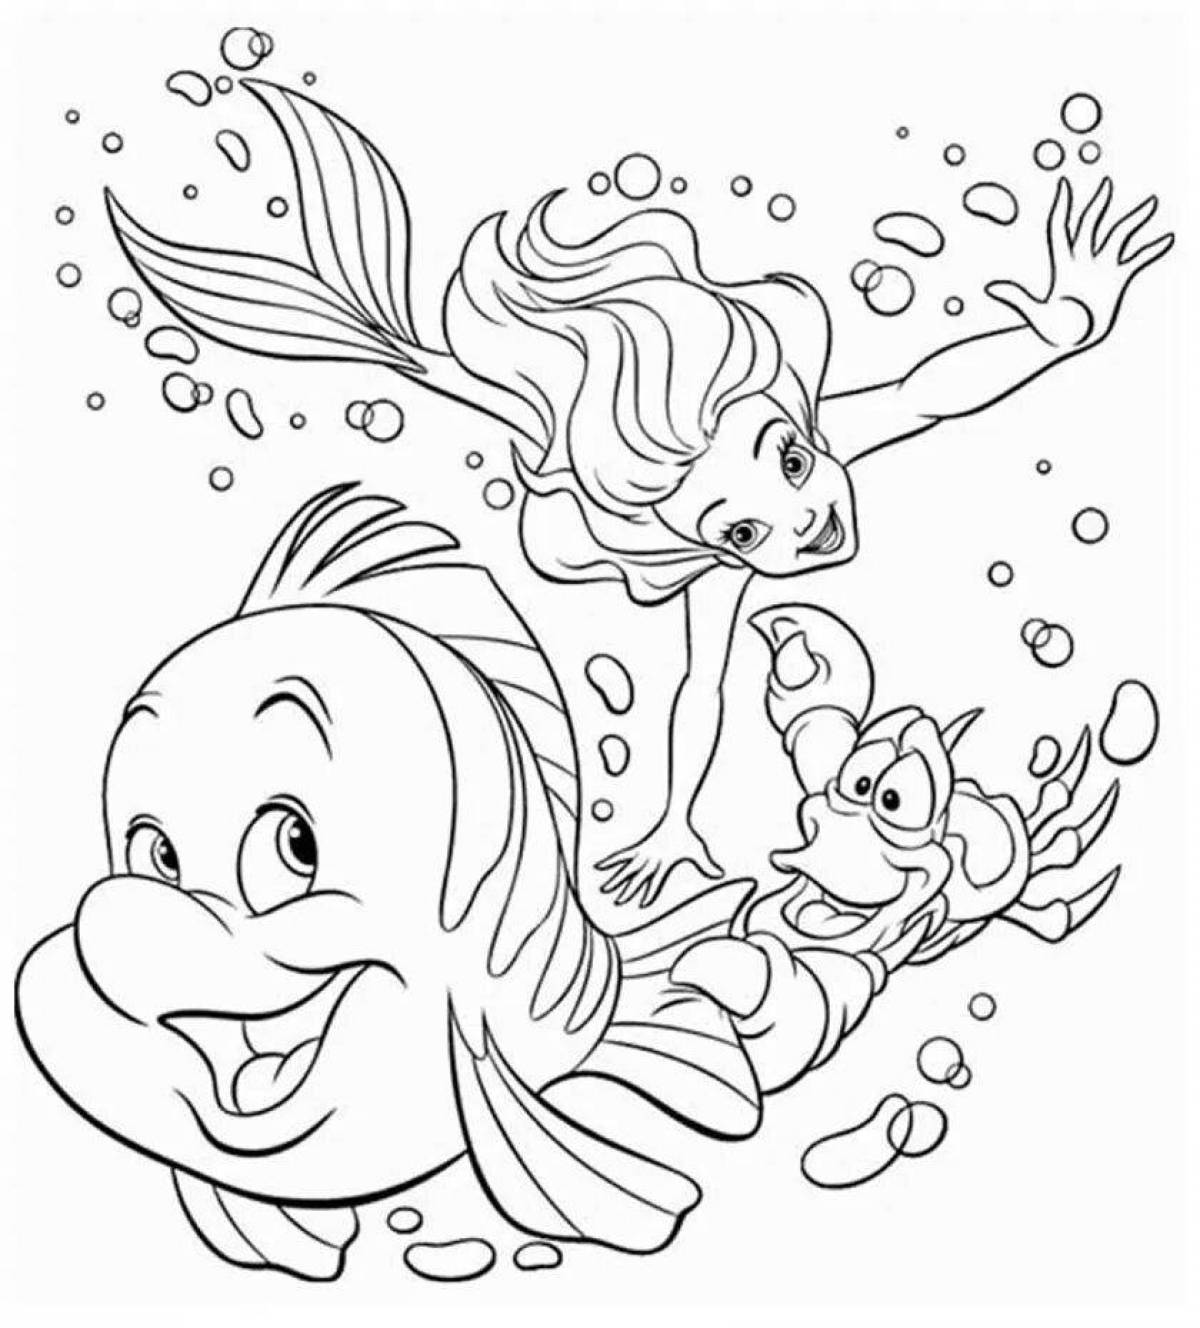 Coloring pages with photos